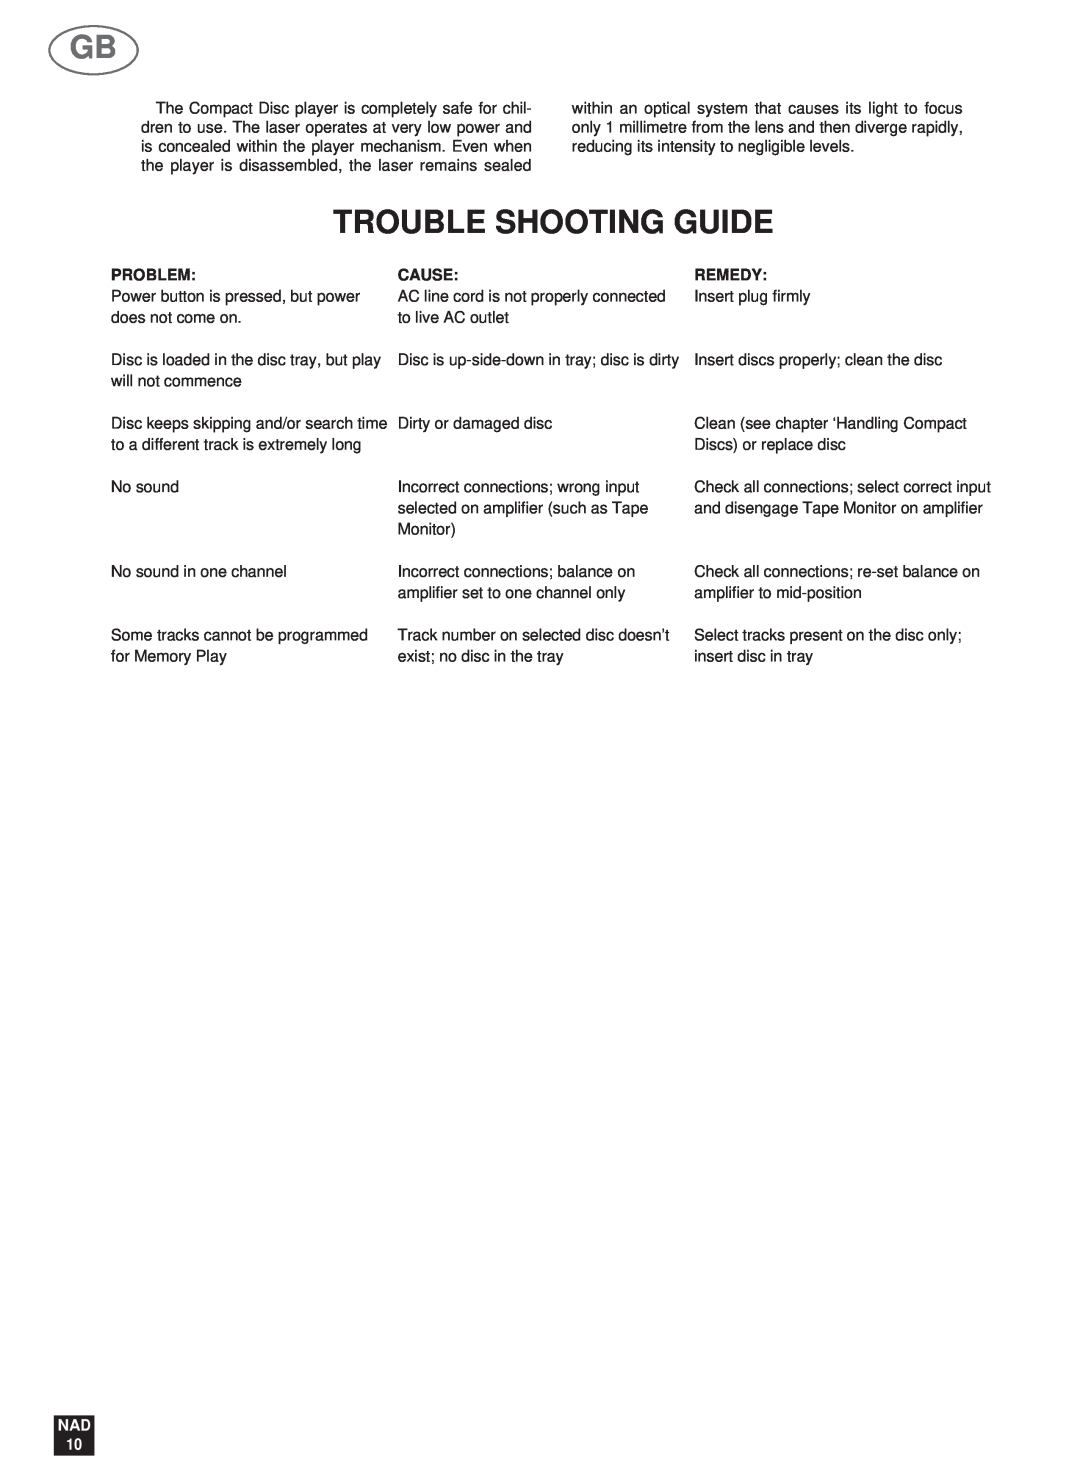 NAD 523 owner manual Trouble Shooting Guide, Problem, Cause, Remedy, NAD 10 